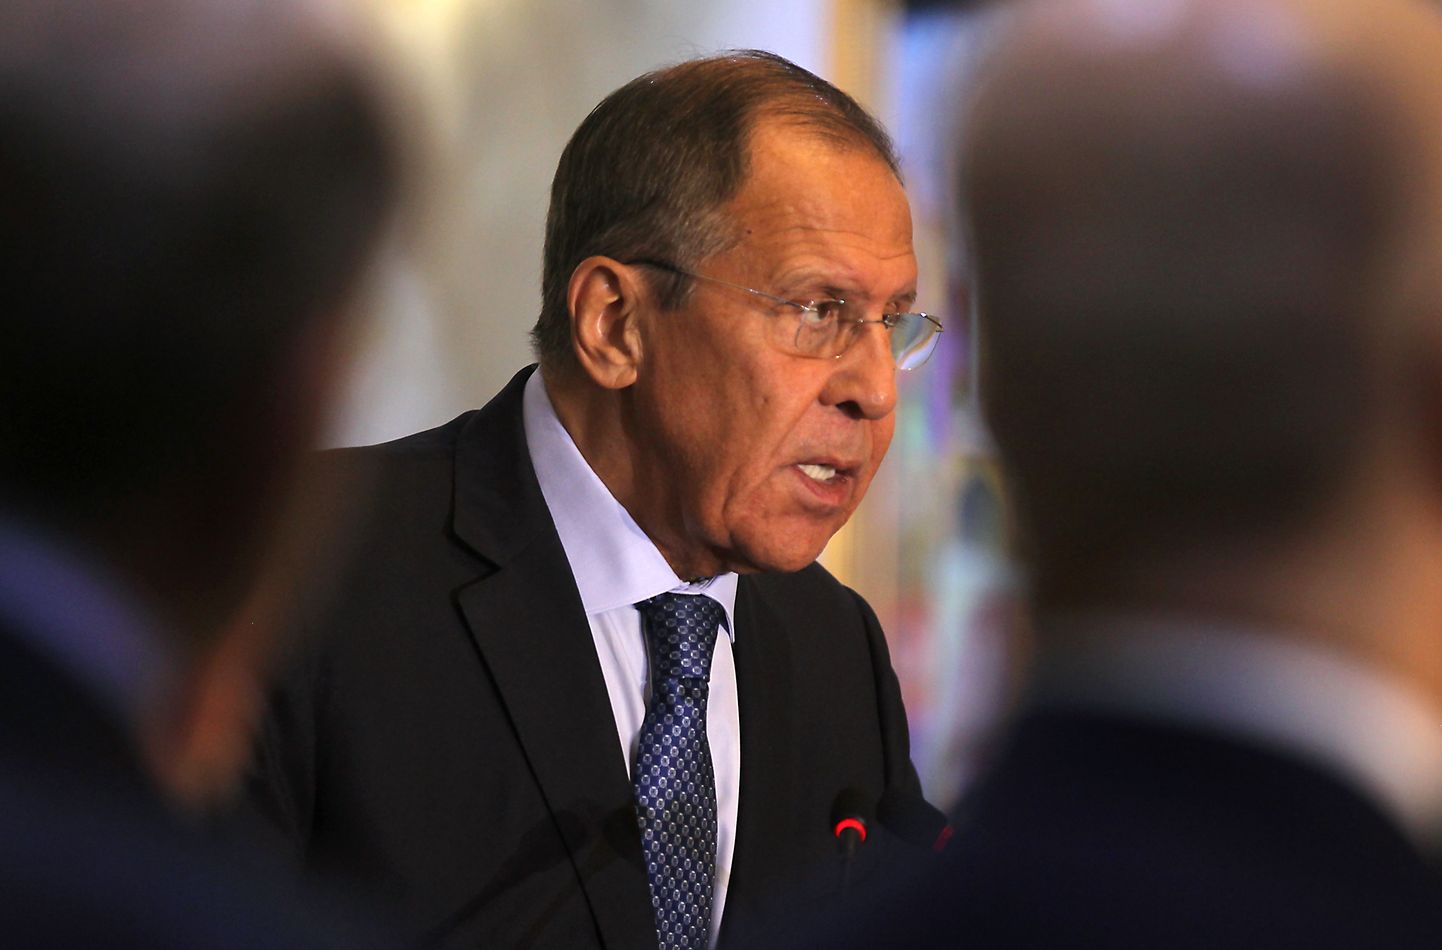 Russian Foreign Minister Sergey Lavrov talks during a press conference with his Iraq counterpart at the Ministry of Foreign Affairs in Baghdad on October 7, 2019. - Iraq's military admitted for the first time Monday it had used "excessive force" in nearly a week of deadly protests, as paramilitary units said they were ready to back the government. More than 100 people have been killed and several thousand wounded in demonstrations increasingly spiralling into violence, with witnesses reporting security forces using water cannons, tear gas and live rounds. (Photo by AHMAD AL-RUBAYE / AFP)